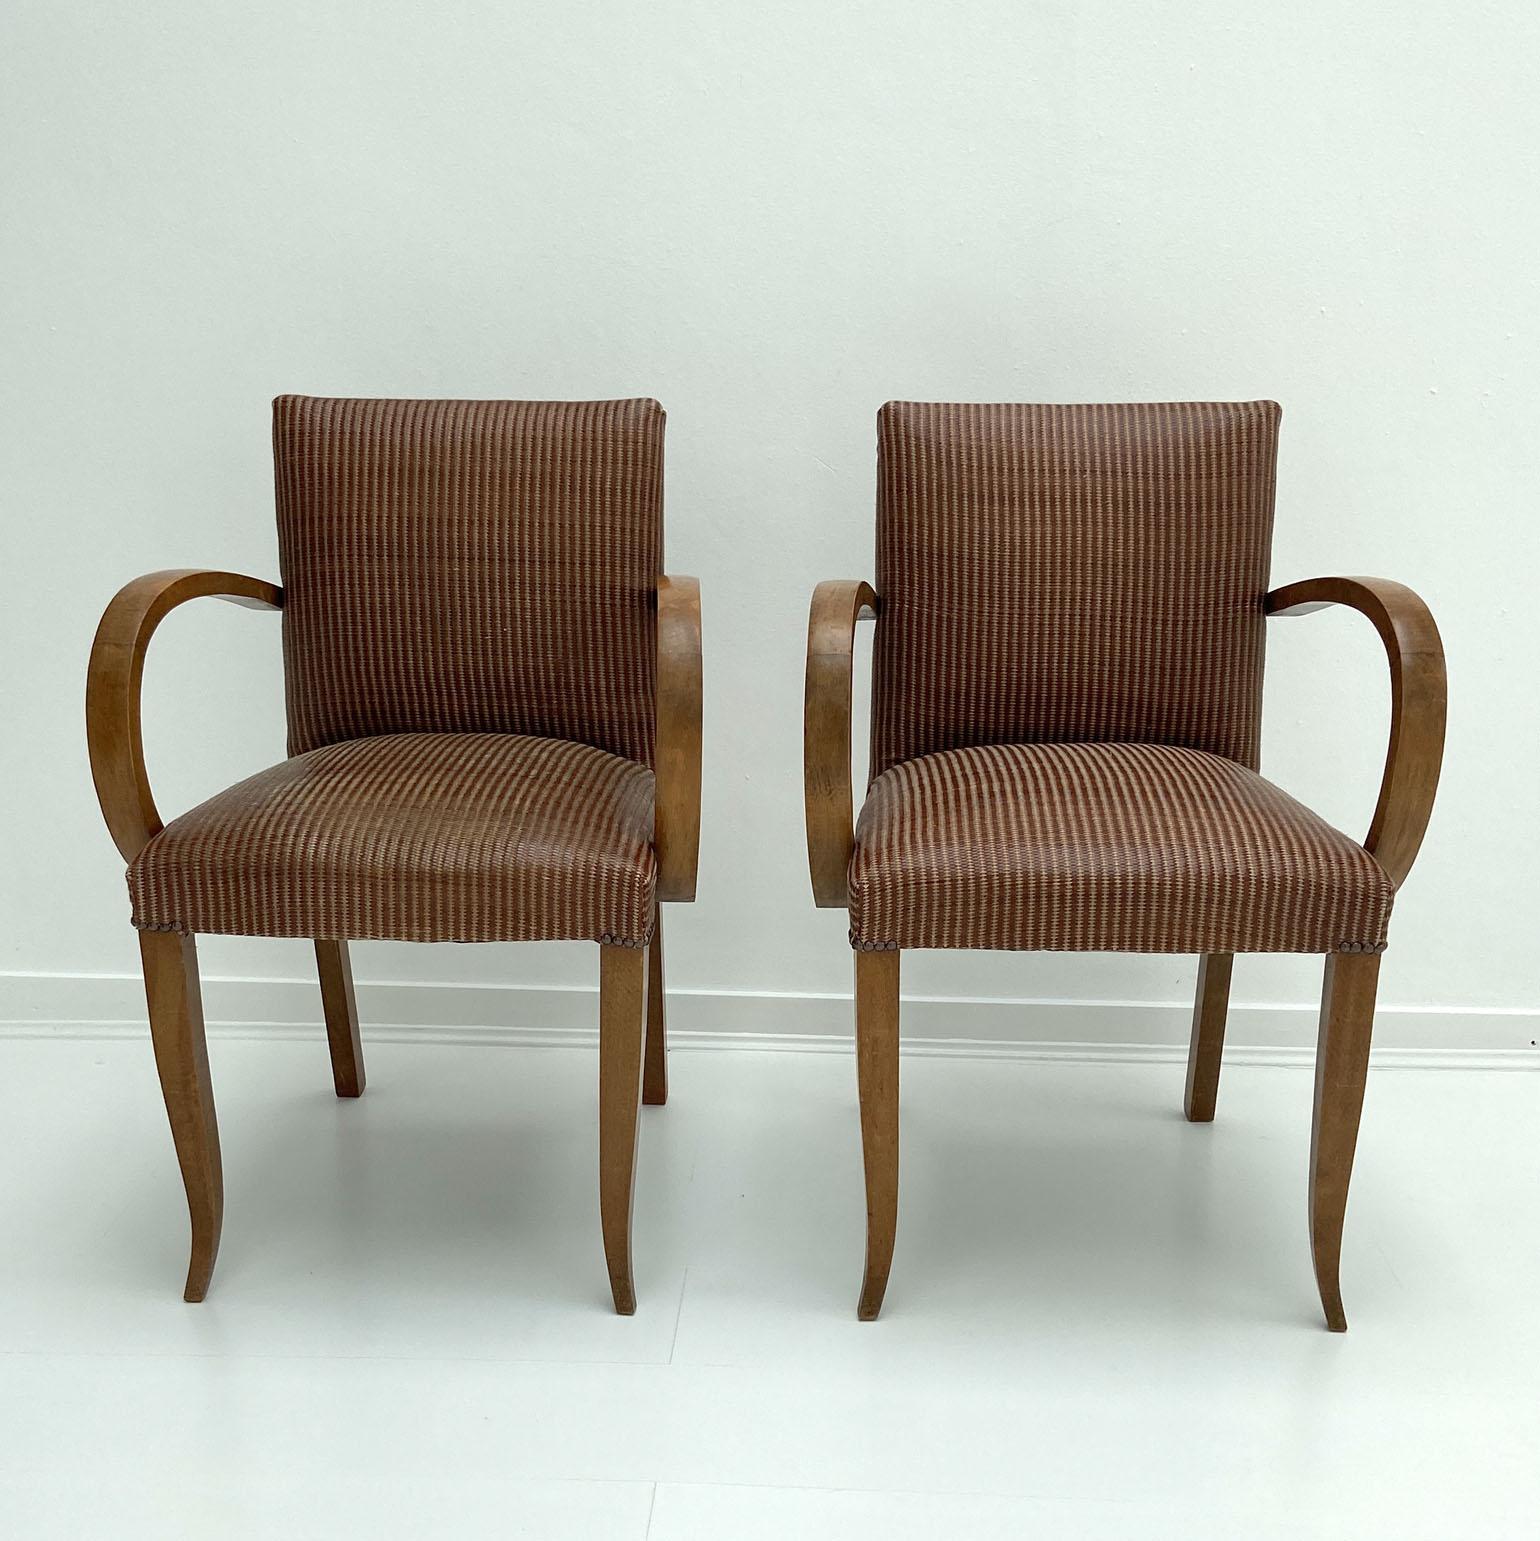 Leather Pair of Modernist Bridge Chairs or Armchairs, French, 1930s